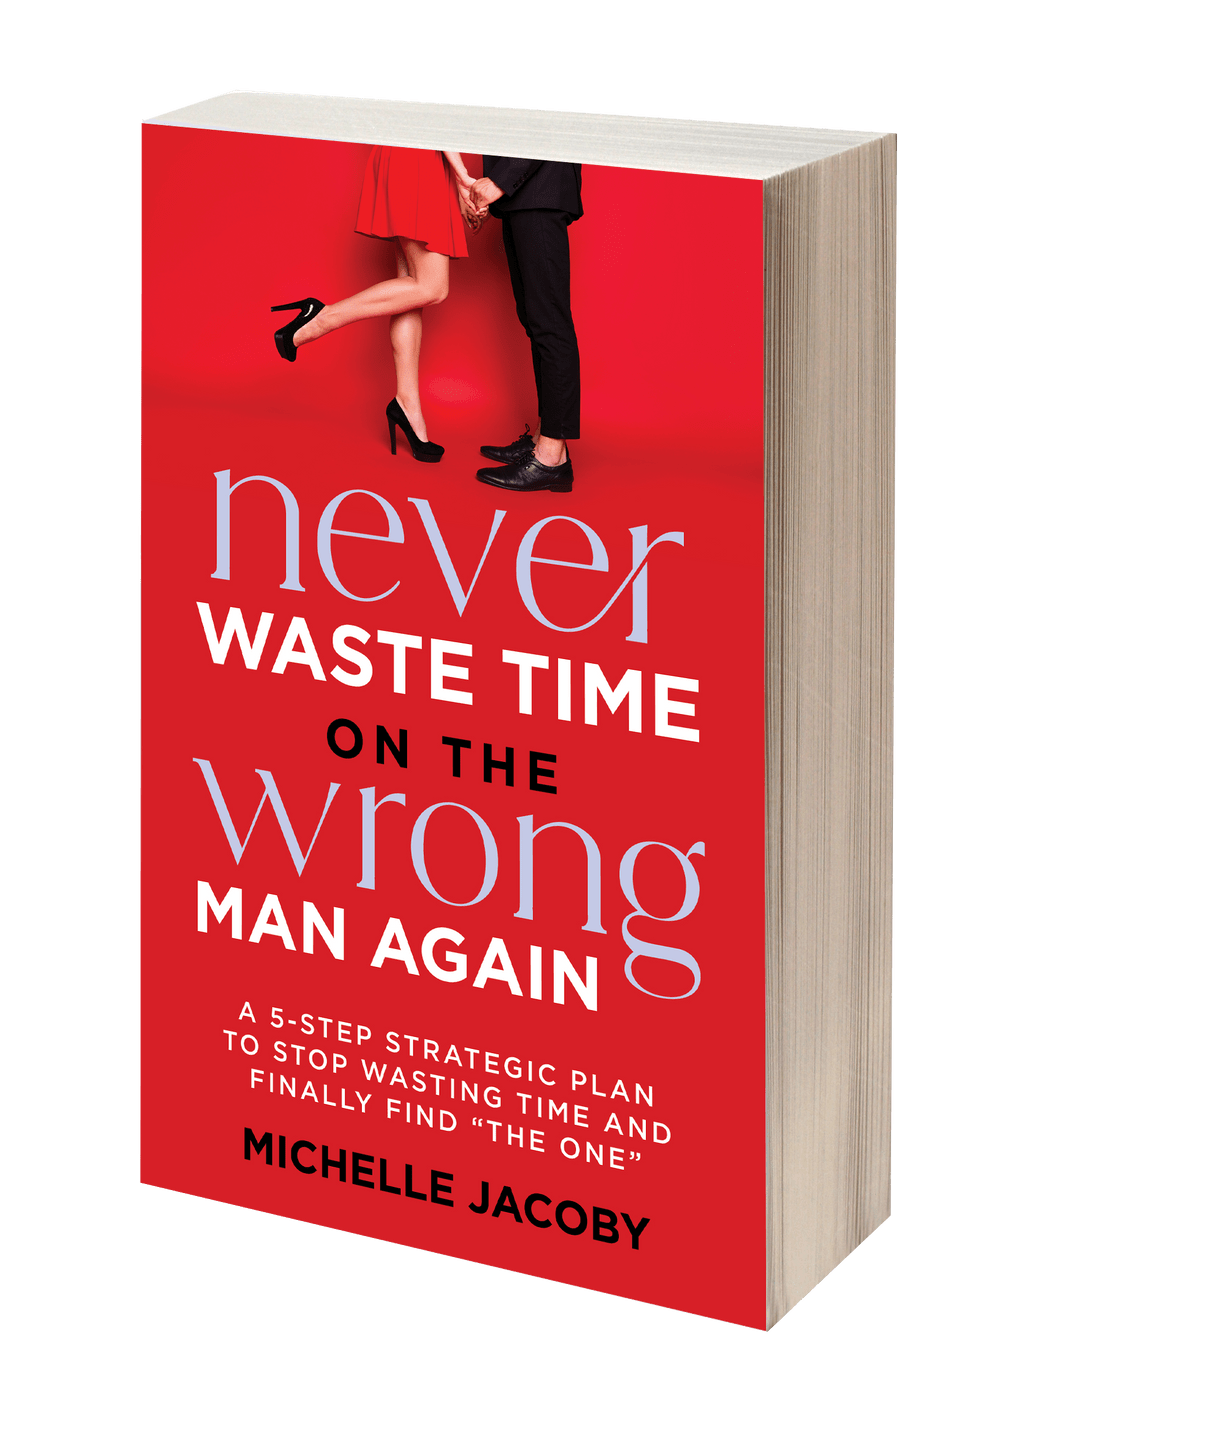 Never Waste time on the wrong man again michelle jacoby